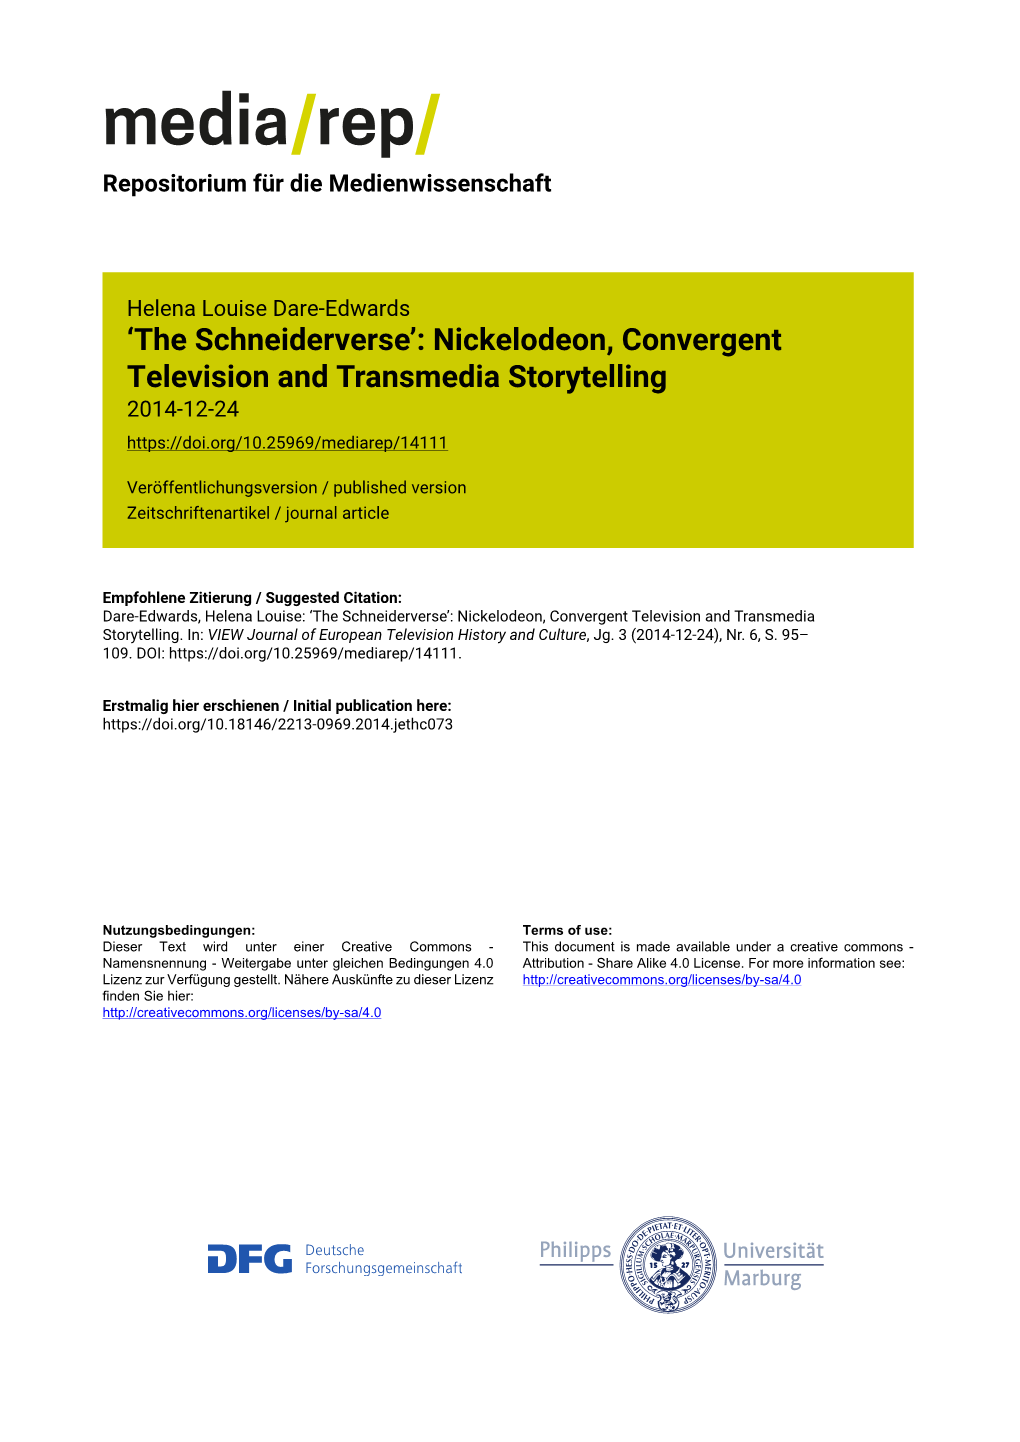 Nickelodeon, Convergent Television and Transmedia Storytelling 2014-12-24